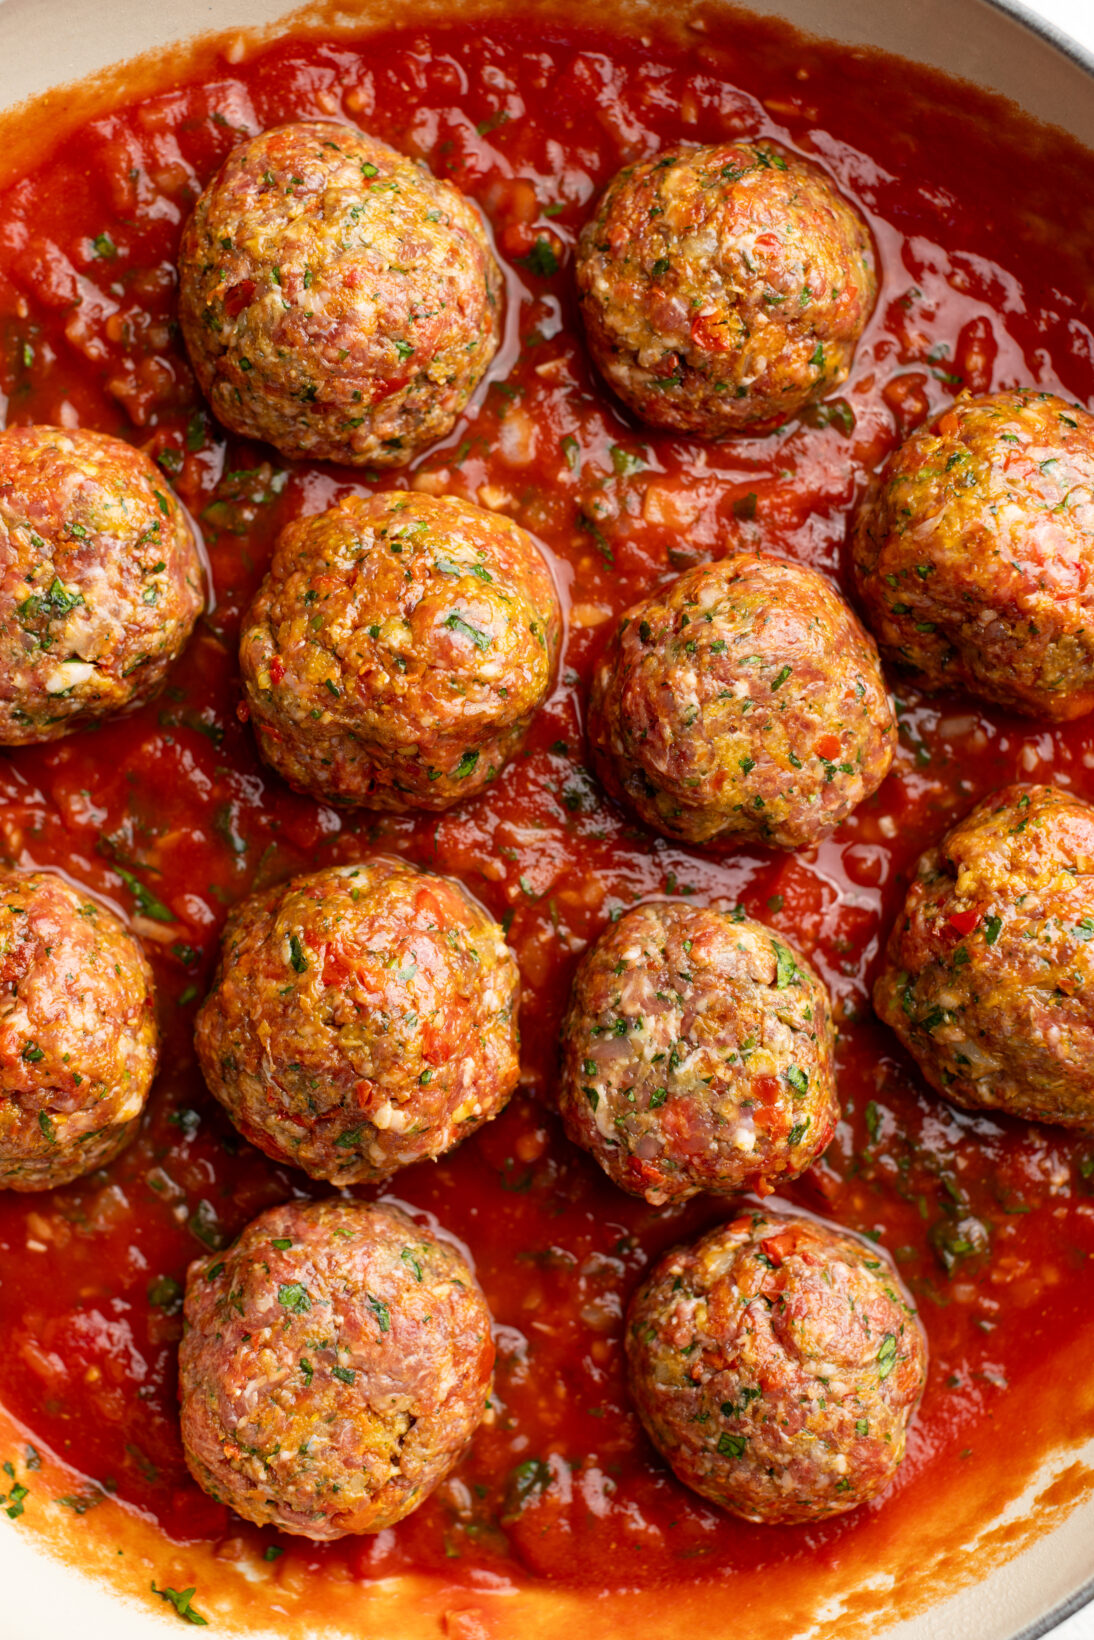 meatballs placed in the simmering sauce before going into the oven